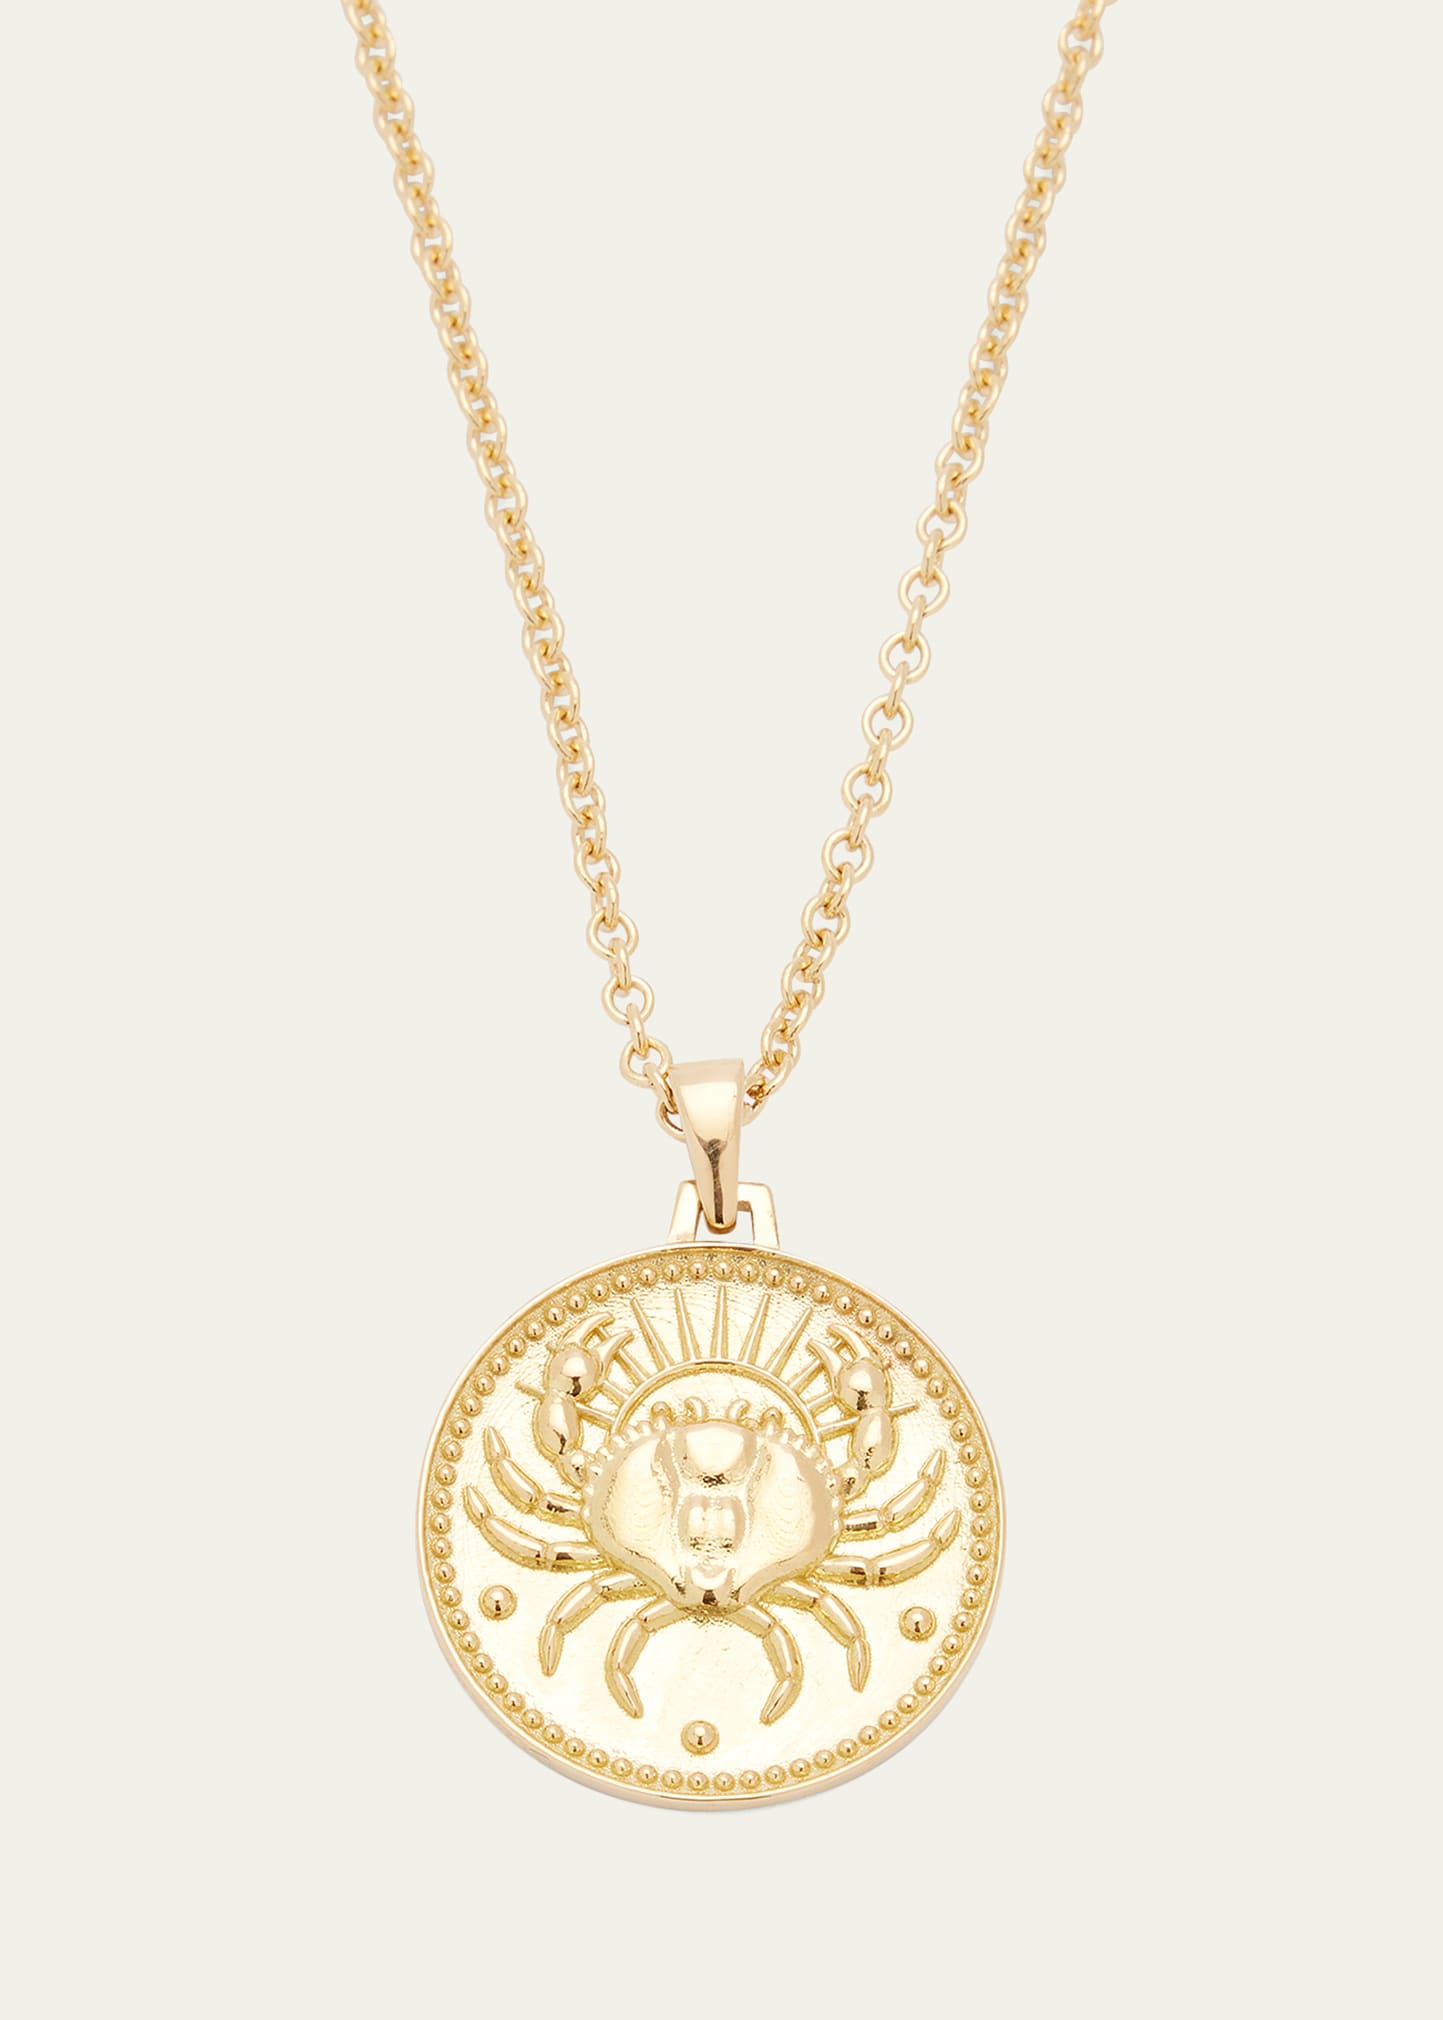 Futura Jewelry Fairmined Gold Cancer Necklace